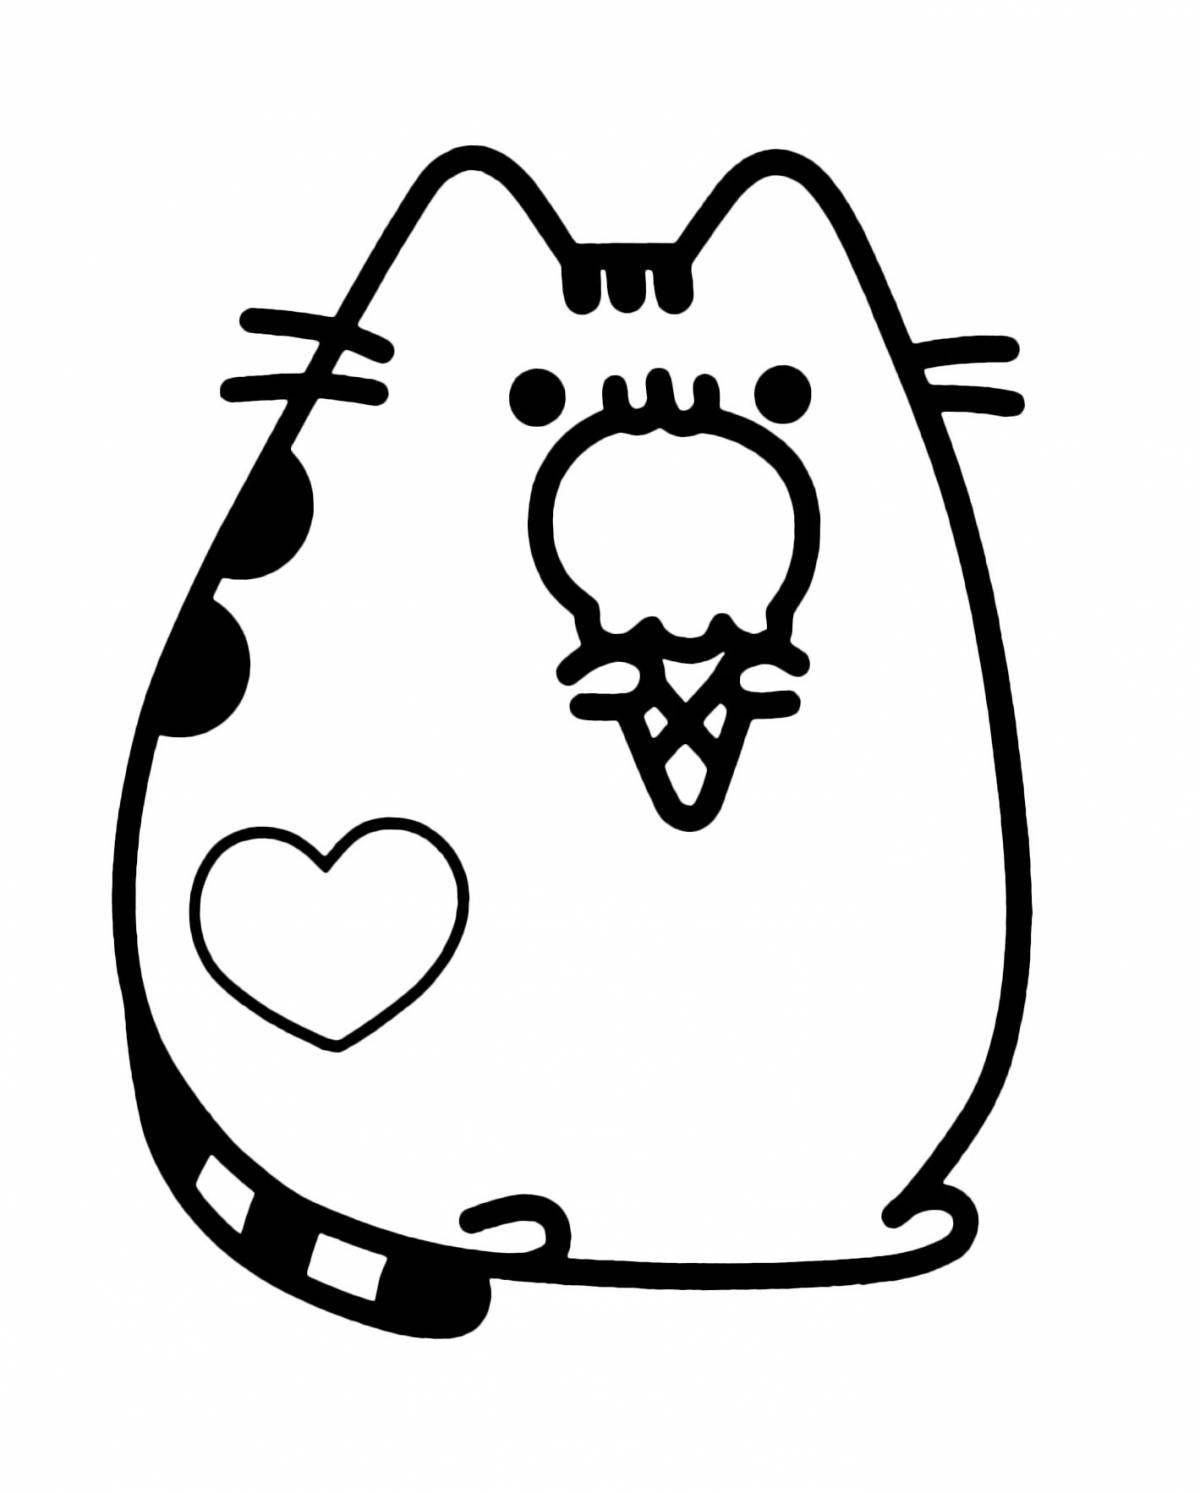 Snuggly pusheen cat coloring page